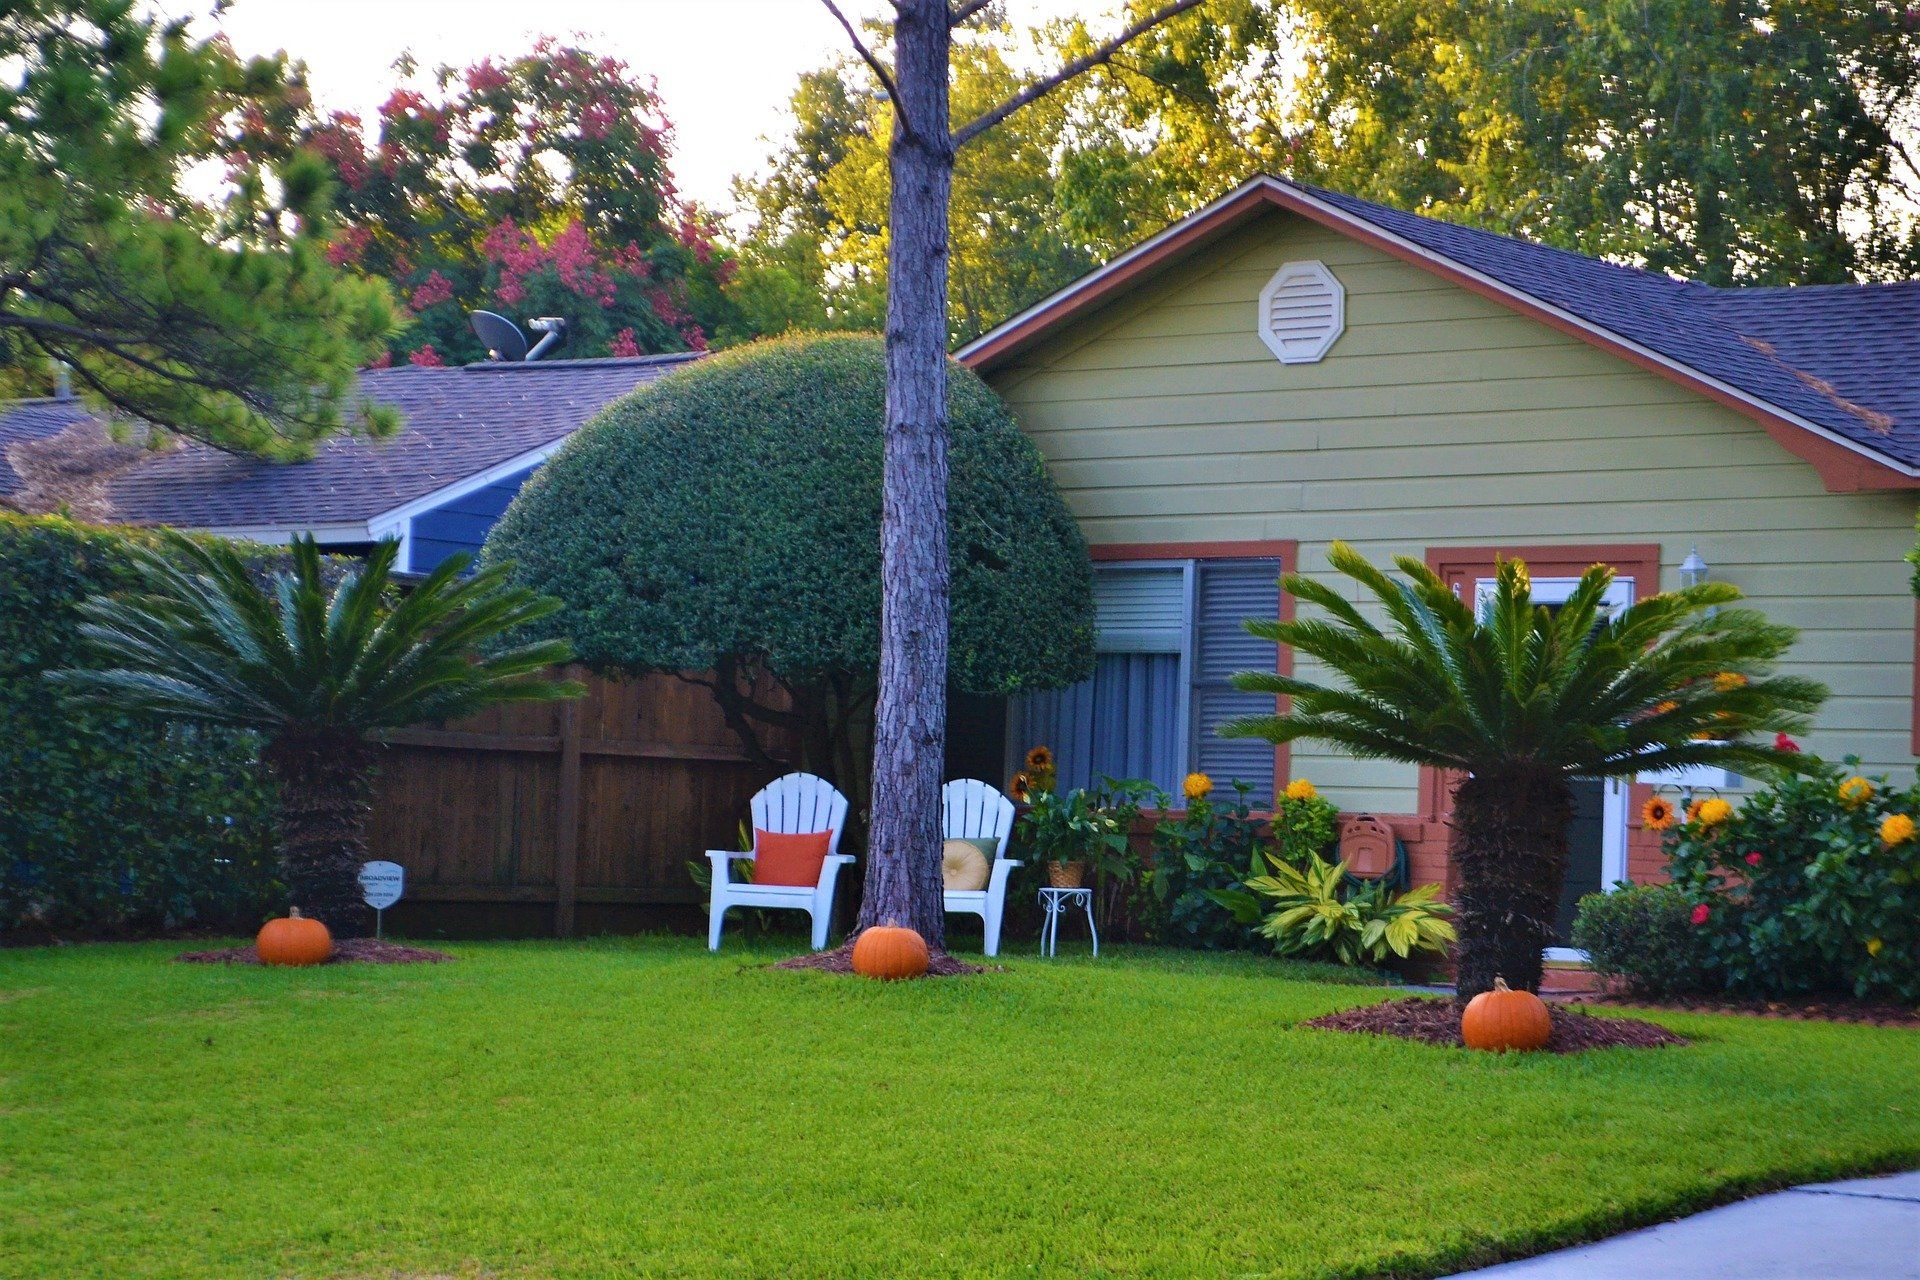 Backyard lawn with palm trees and pumpkin decorations.